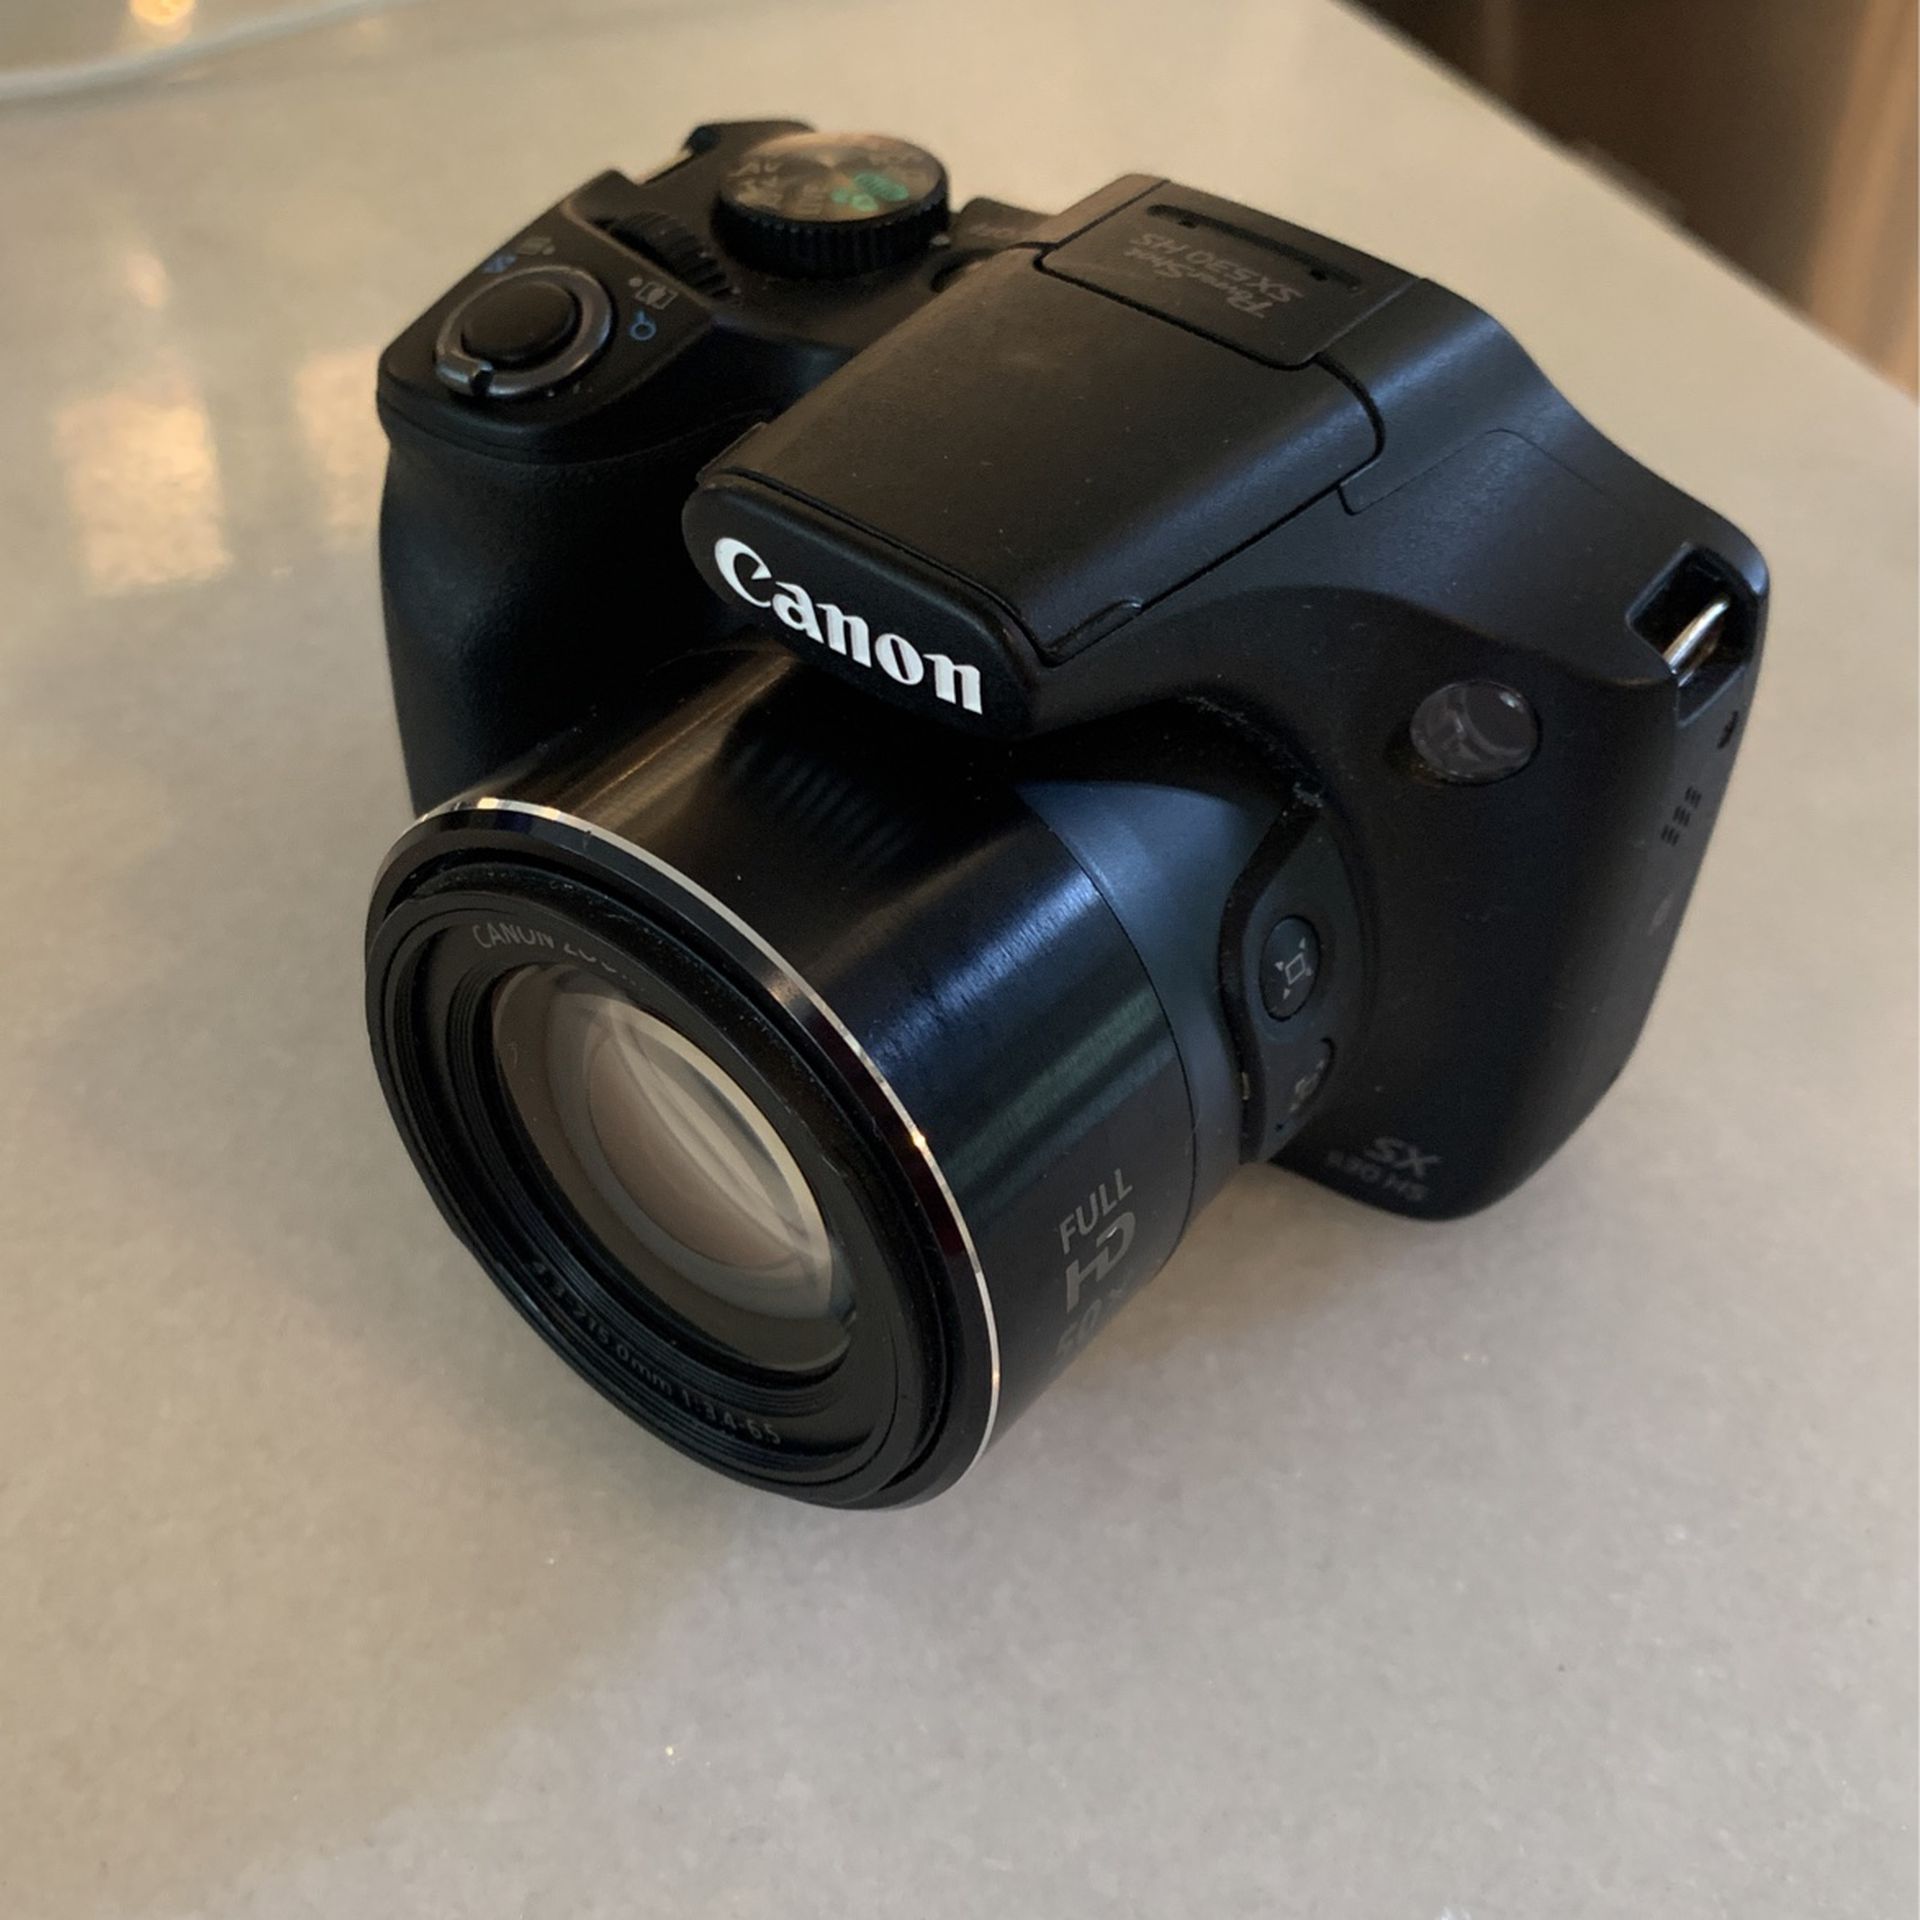 Canon PowerShot SX530 HS A Versatile Camera for Stunning Photography